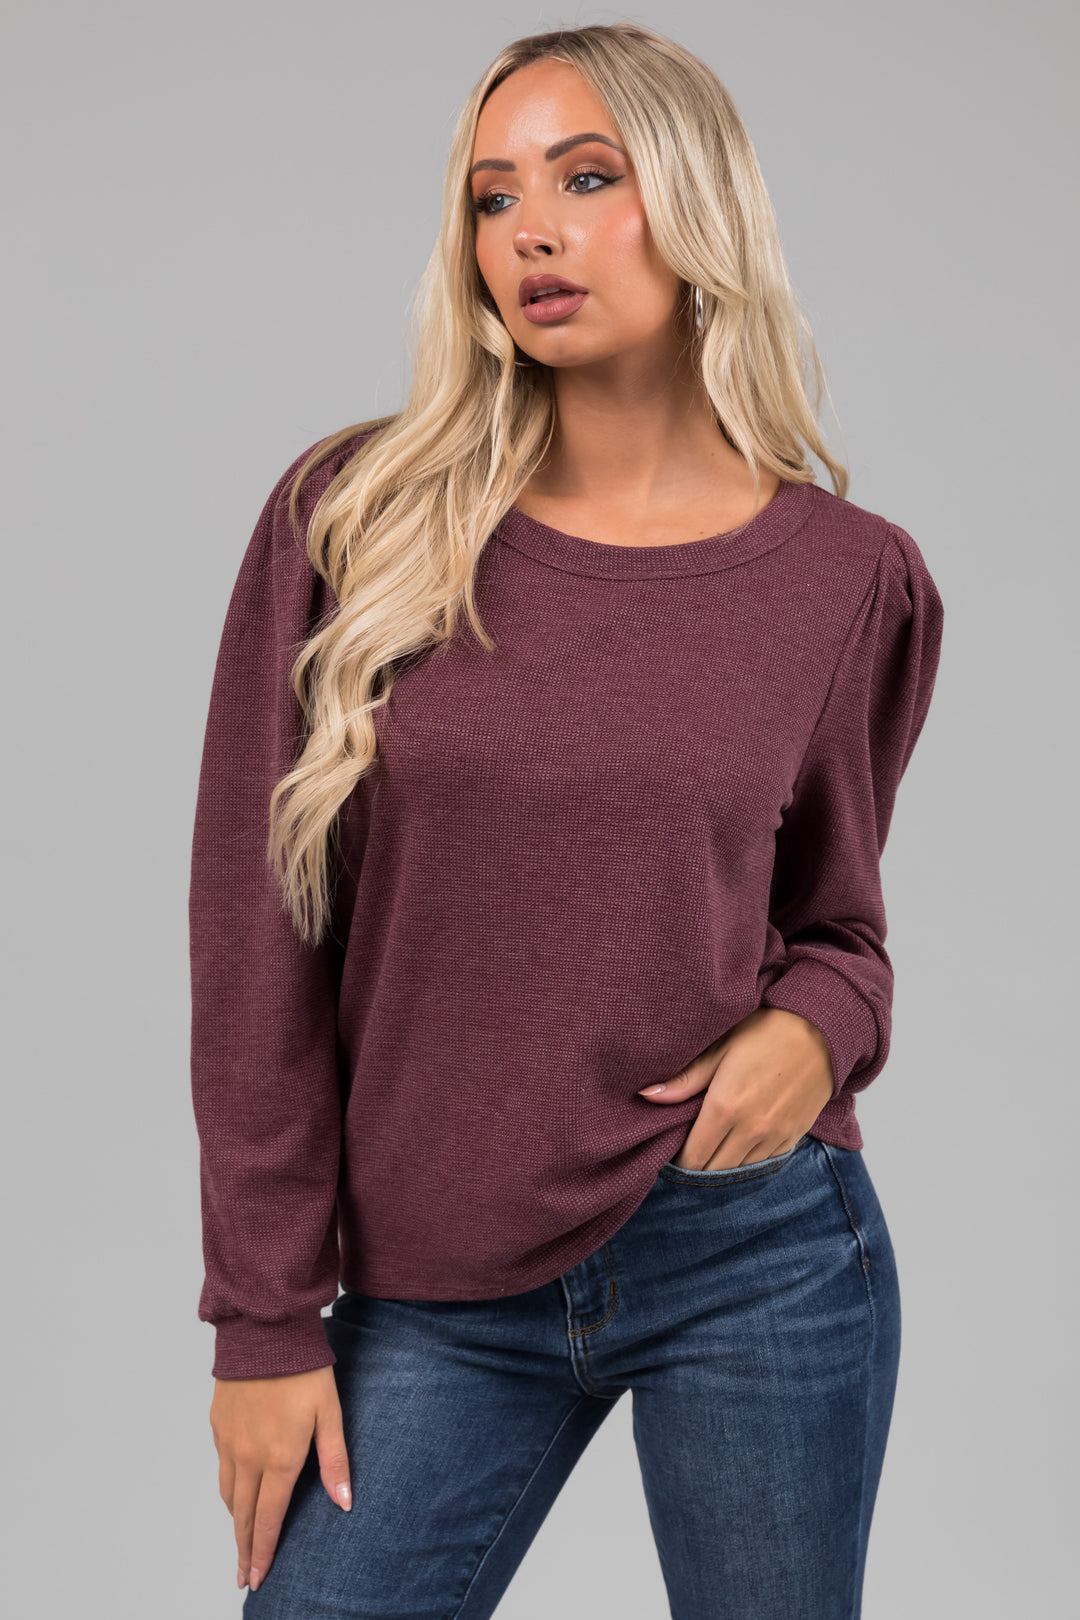 Faded Berry Puff Shoulder Thermal Knit Top & Lime Lush